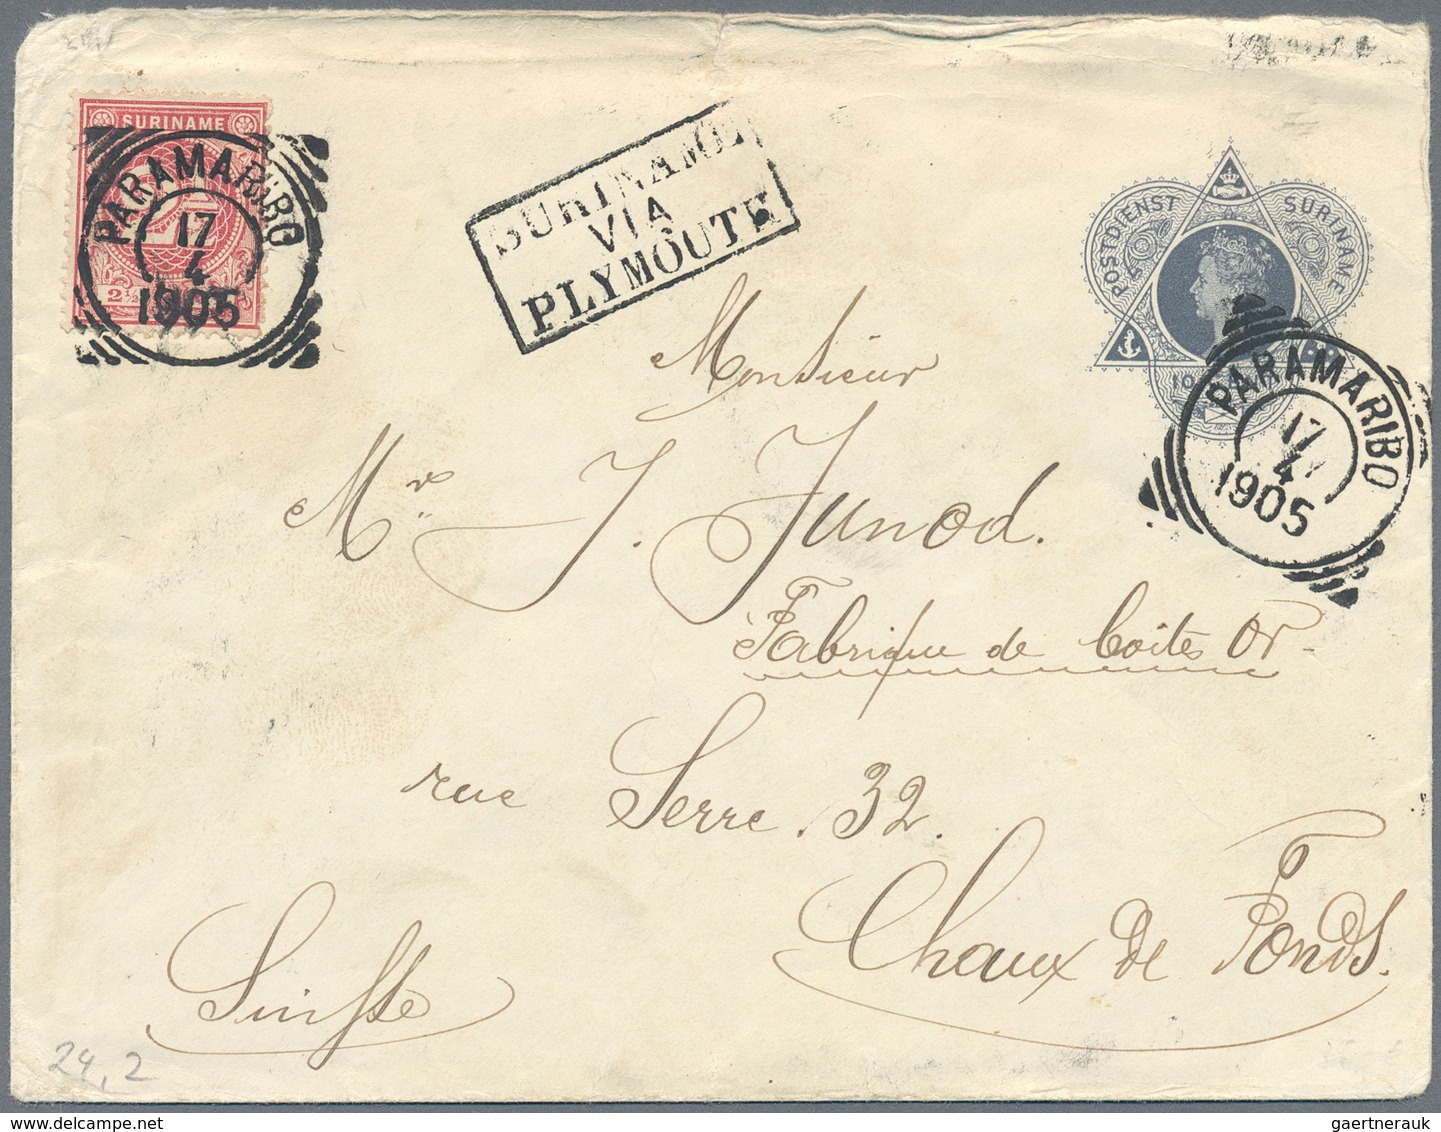 Curacao: 1884/1942, Covers (5), Used Ppc (2) And Used Stationery (11 Inc. Uprates) Inc. Registration - Curacao, Netherlands Antilles, Aruba